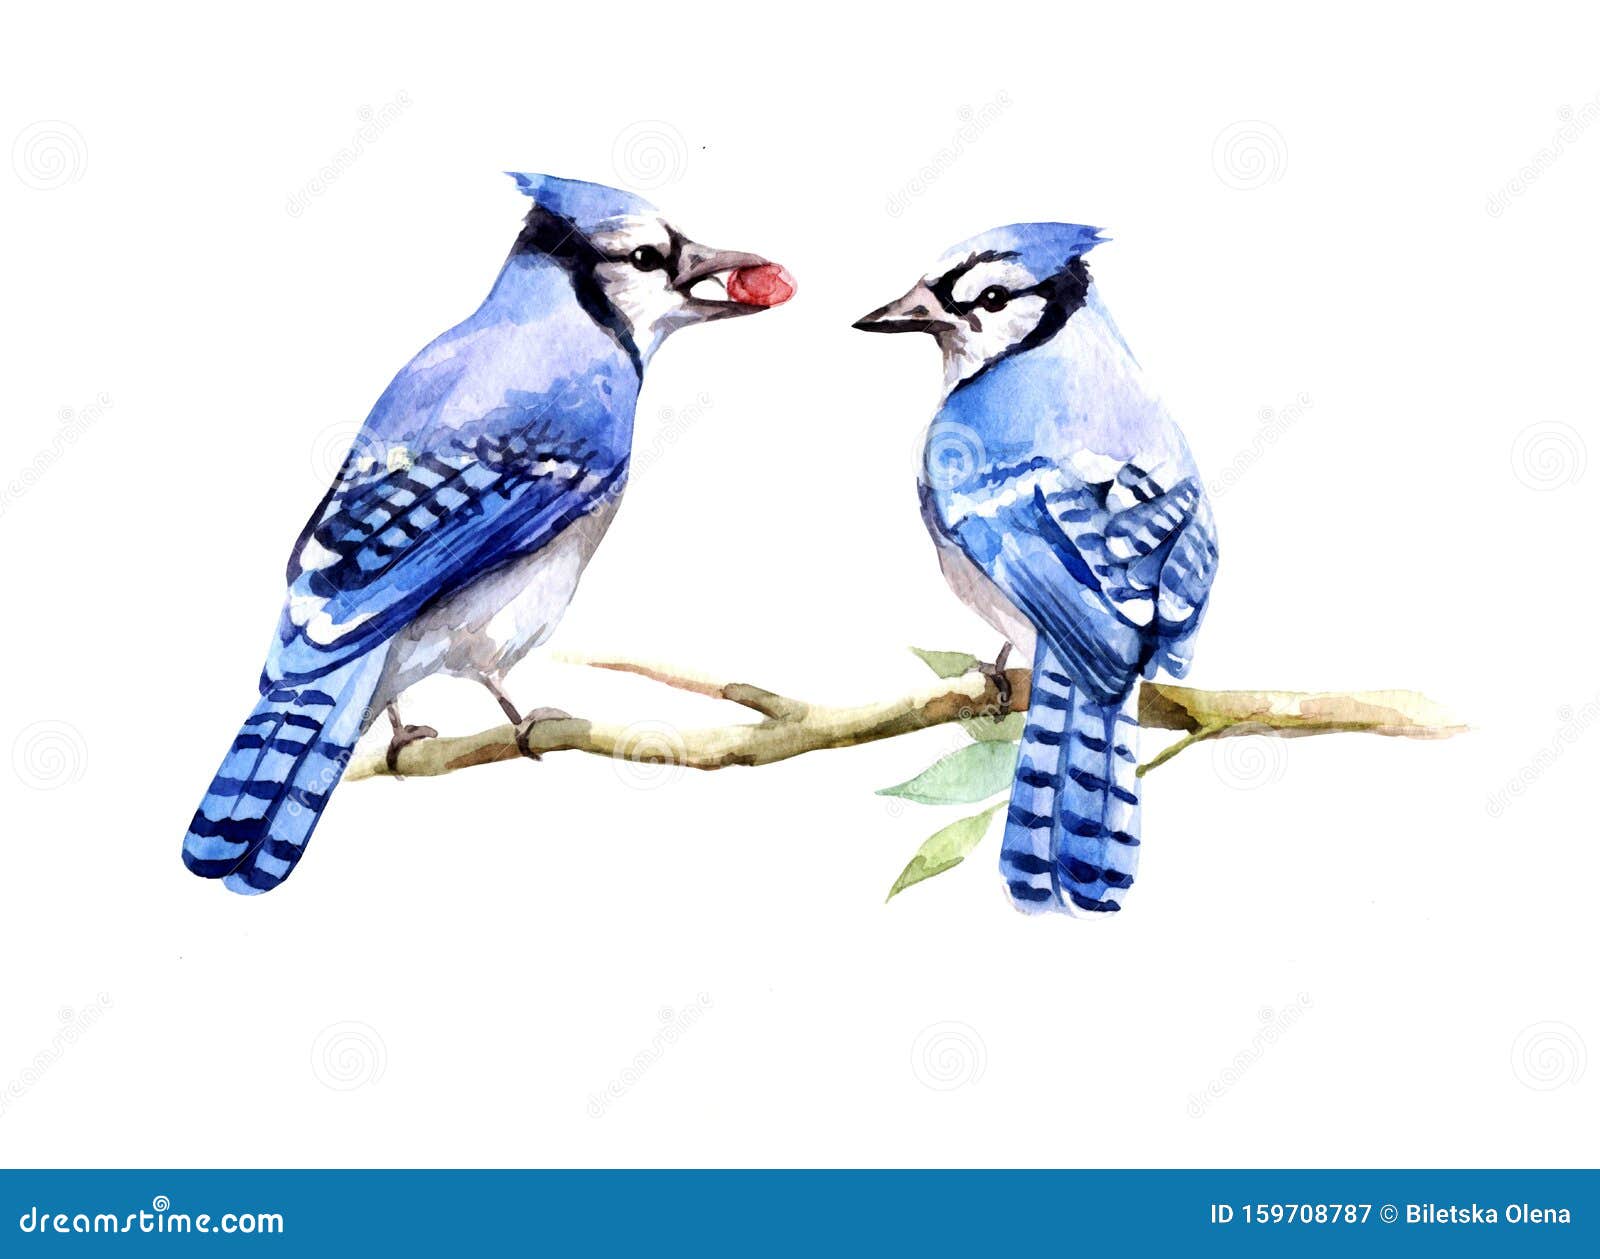 Watercolor Illustration With Two Blue Jays Birds Stock Illustration Illustration Of Birds White